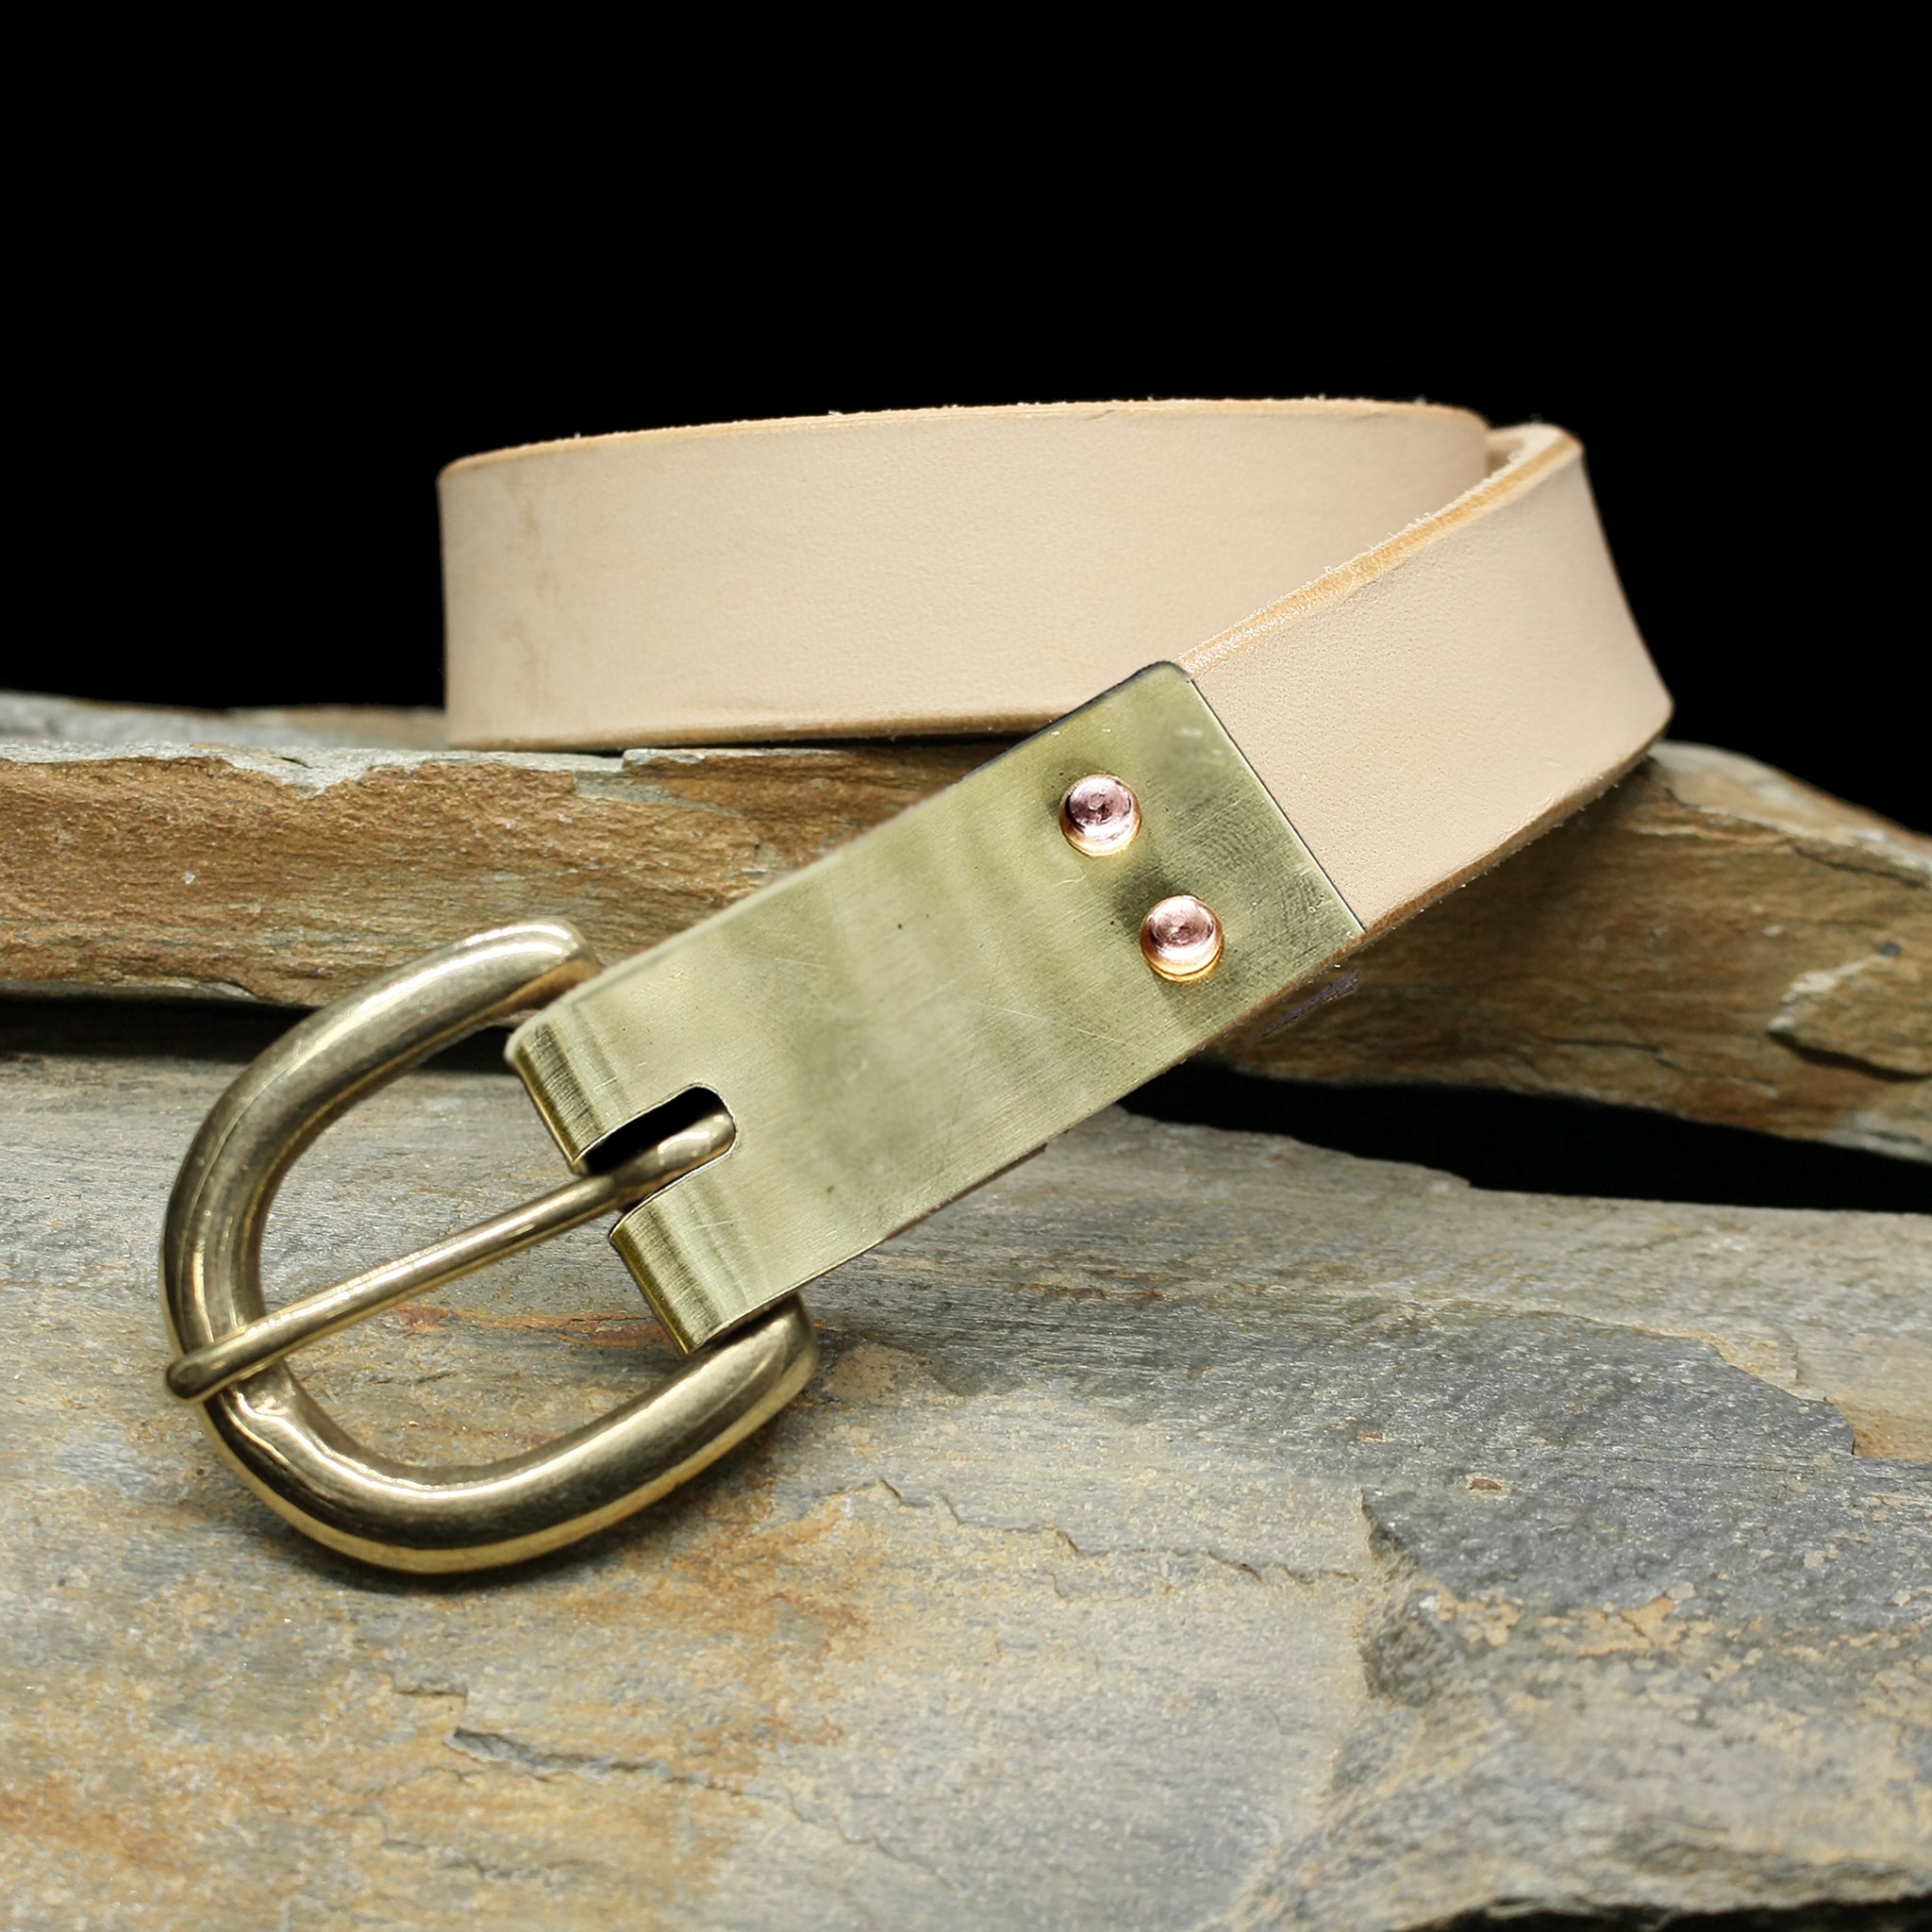 Natural Veg Tan 1 Inch (25mm) Wide Leather Viking Belt with Brass Buckle and Plain BRass Buckle Plate on Rock